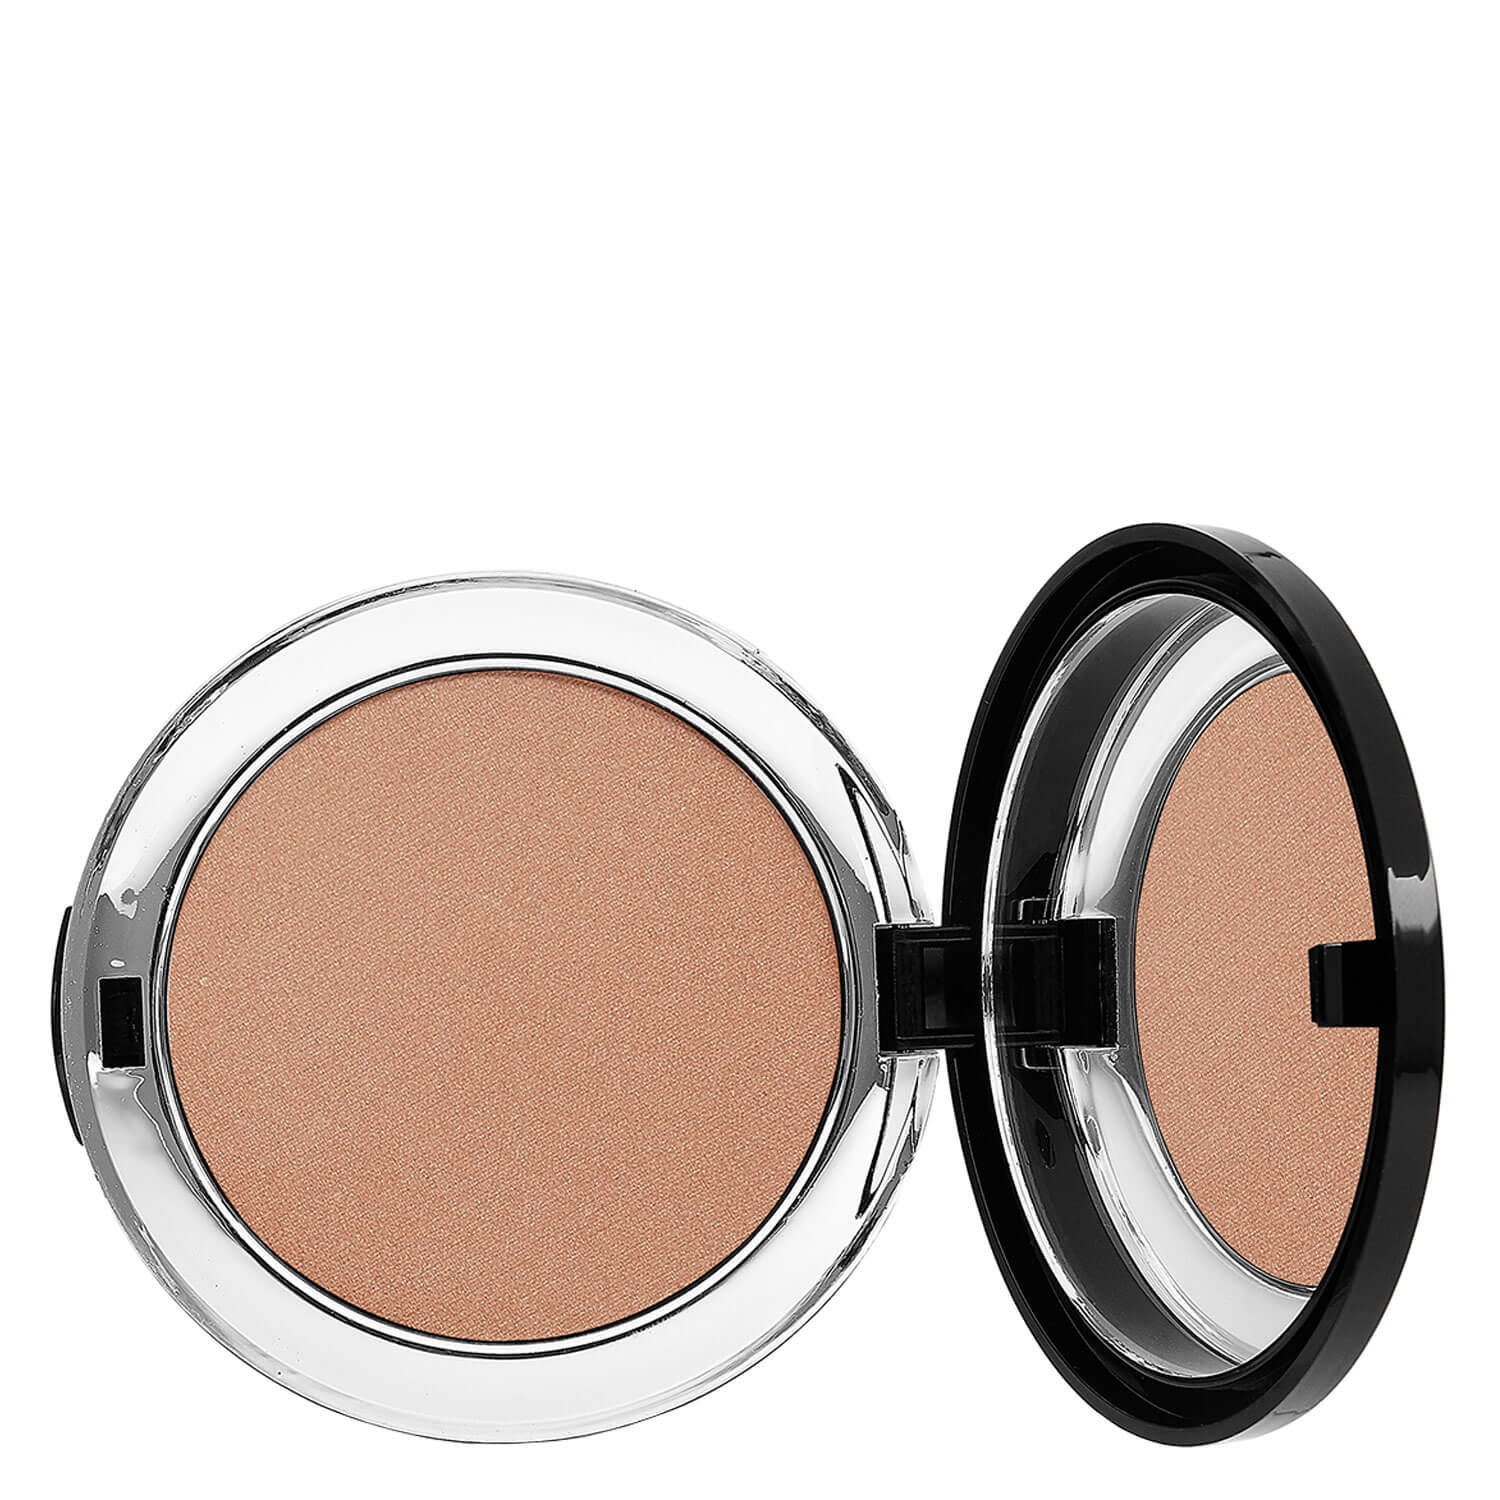 Product image from bellapierre Teint - Compact Mineral Bronzer SPF15 Peony